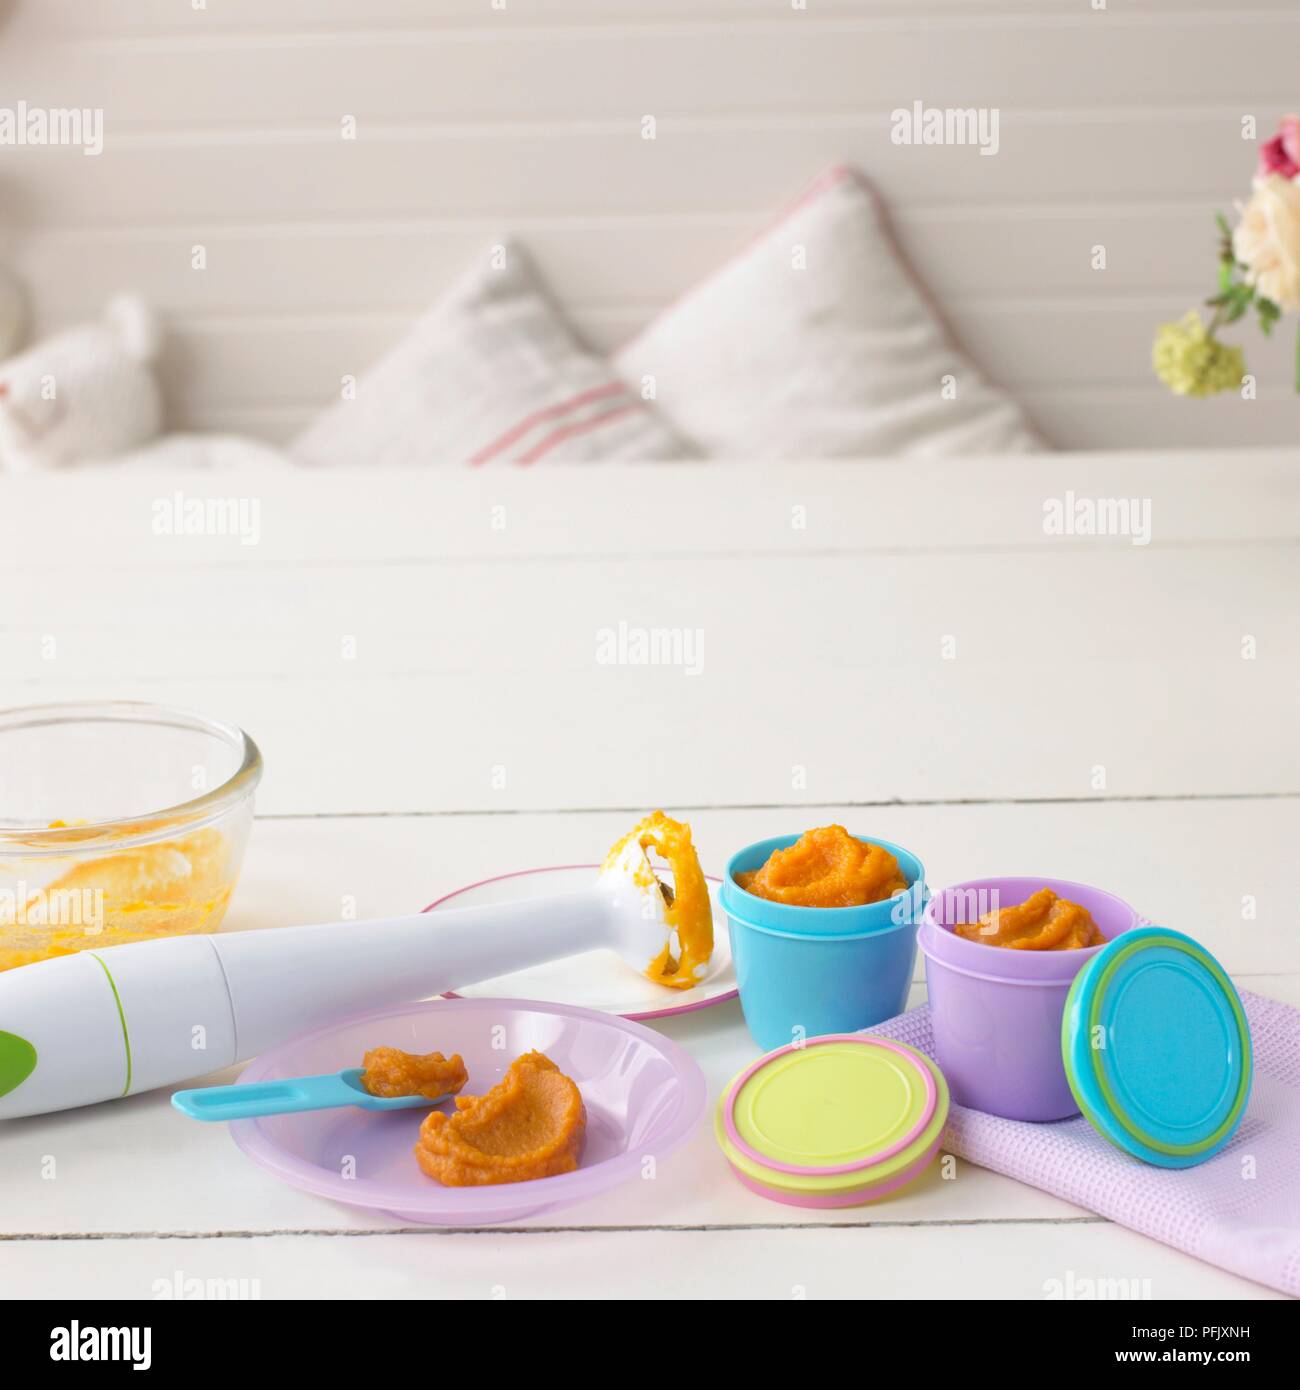 Handheld blender resting on a plate next to plastic pots and a bowl containing carrot puree, on a table Stock Photo